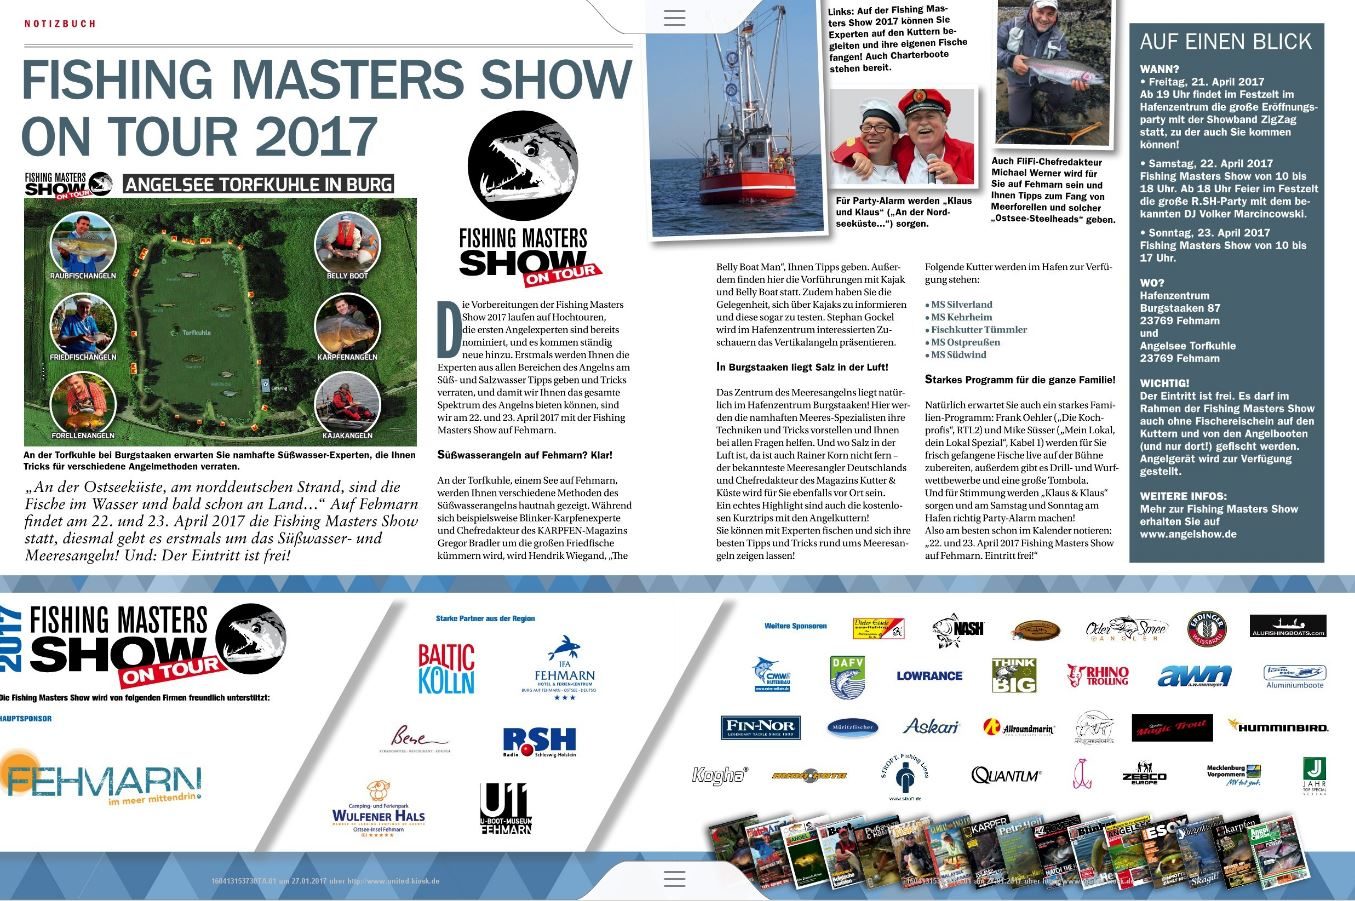 Fishing Masters Show on tour